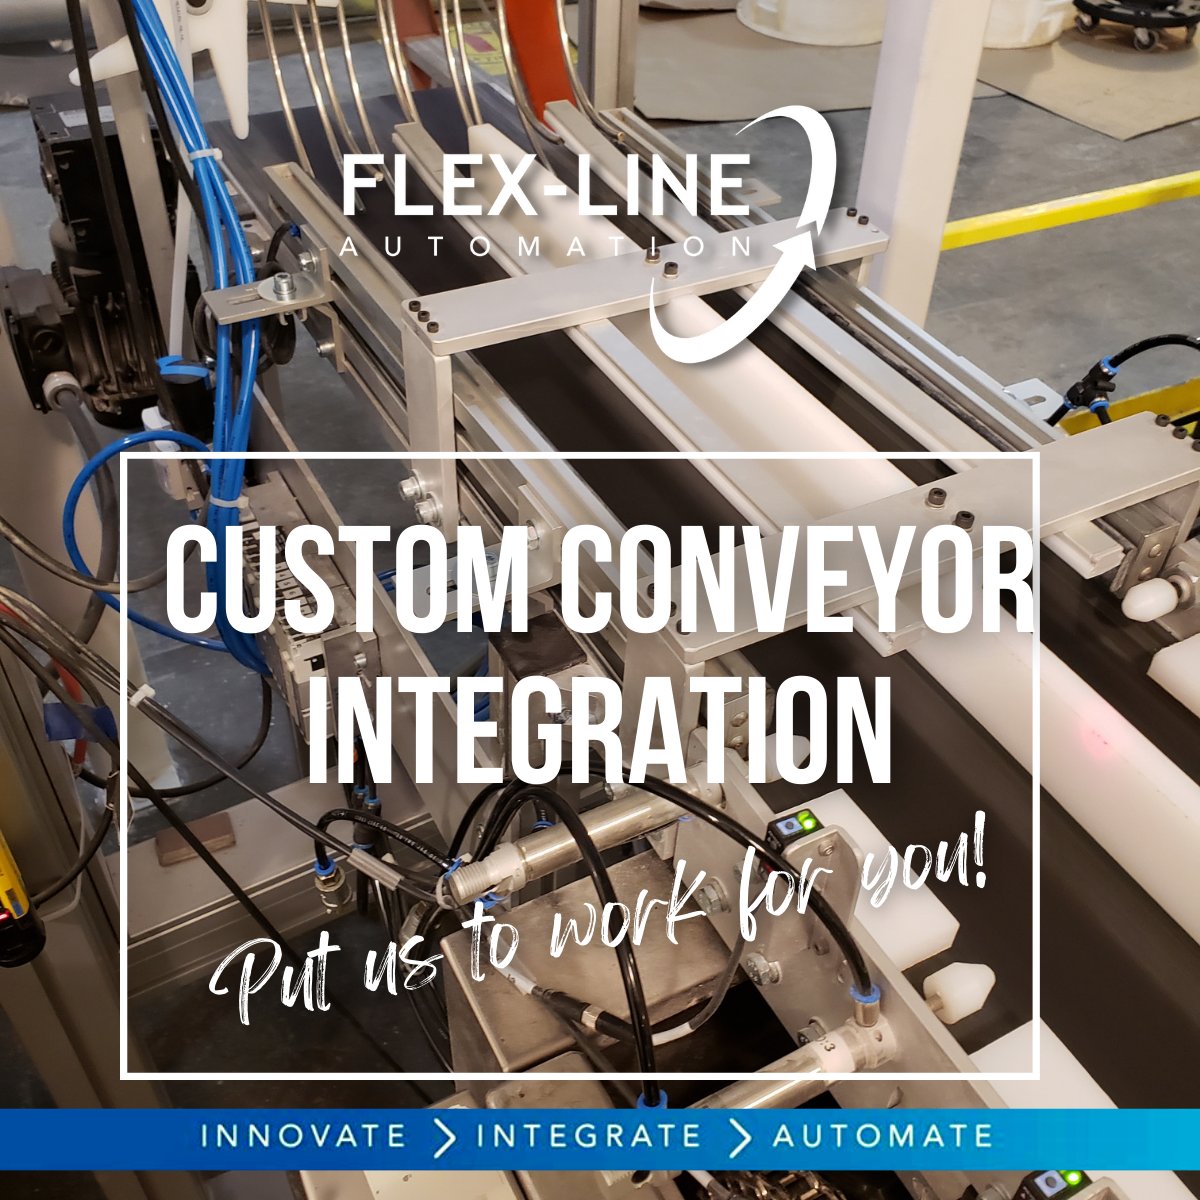 It is international yoga day.  So sit up tall. Extend your spine. Take a deep breath. Reach for the phone and call us to take your stress away! 800.916.0031

#integration #integrator #flexlink #mk #dorner #titan #ACSI #beltconveyor #tabletopconveyor #solutions #robots